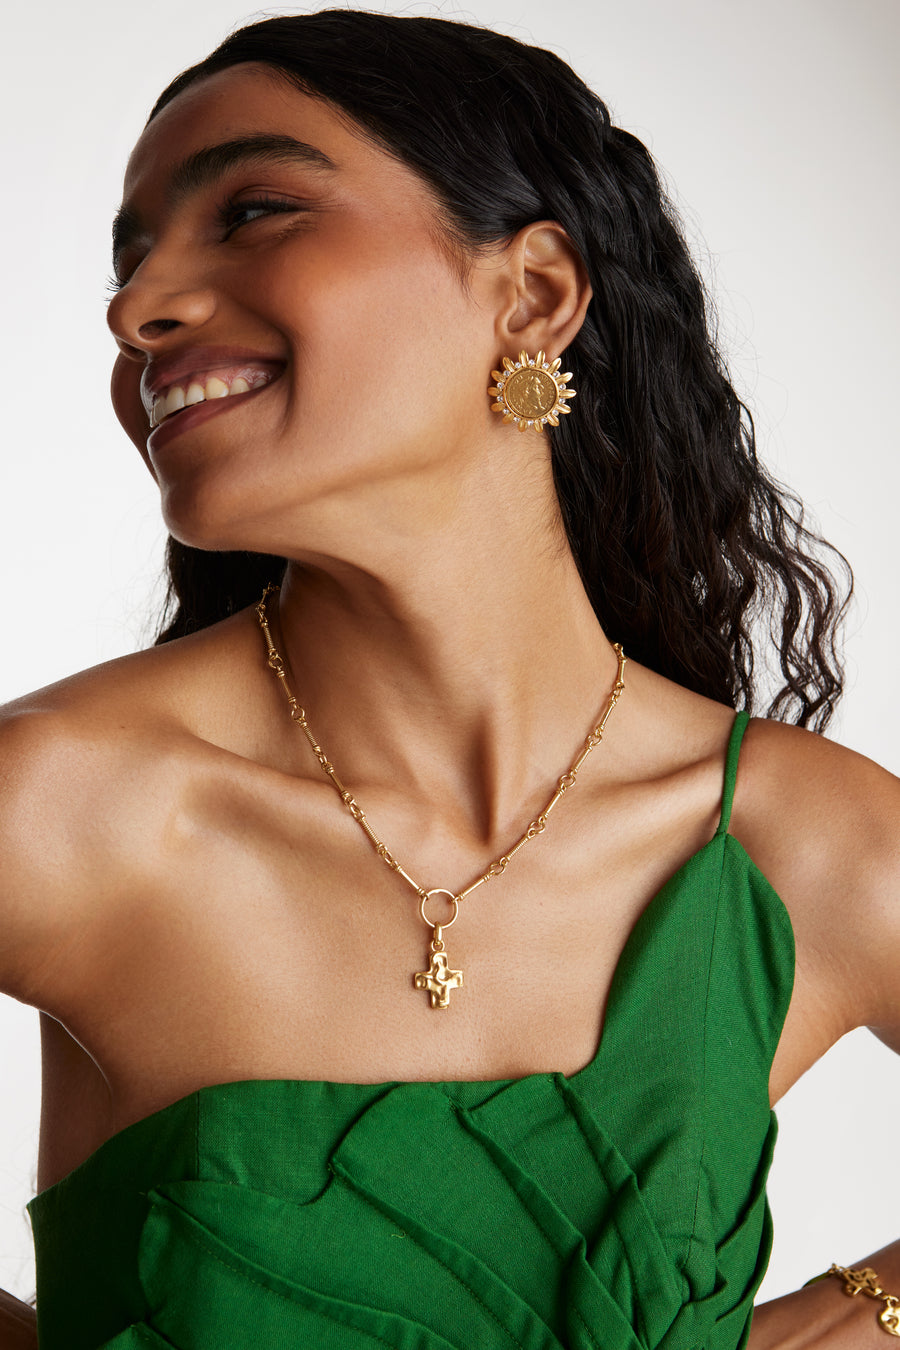 model wearing crystal embellished coin stud earrings with a charm chain necklace and a chunky cross charm.